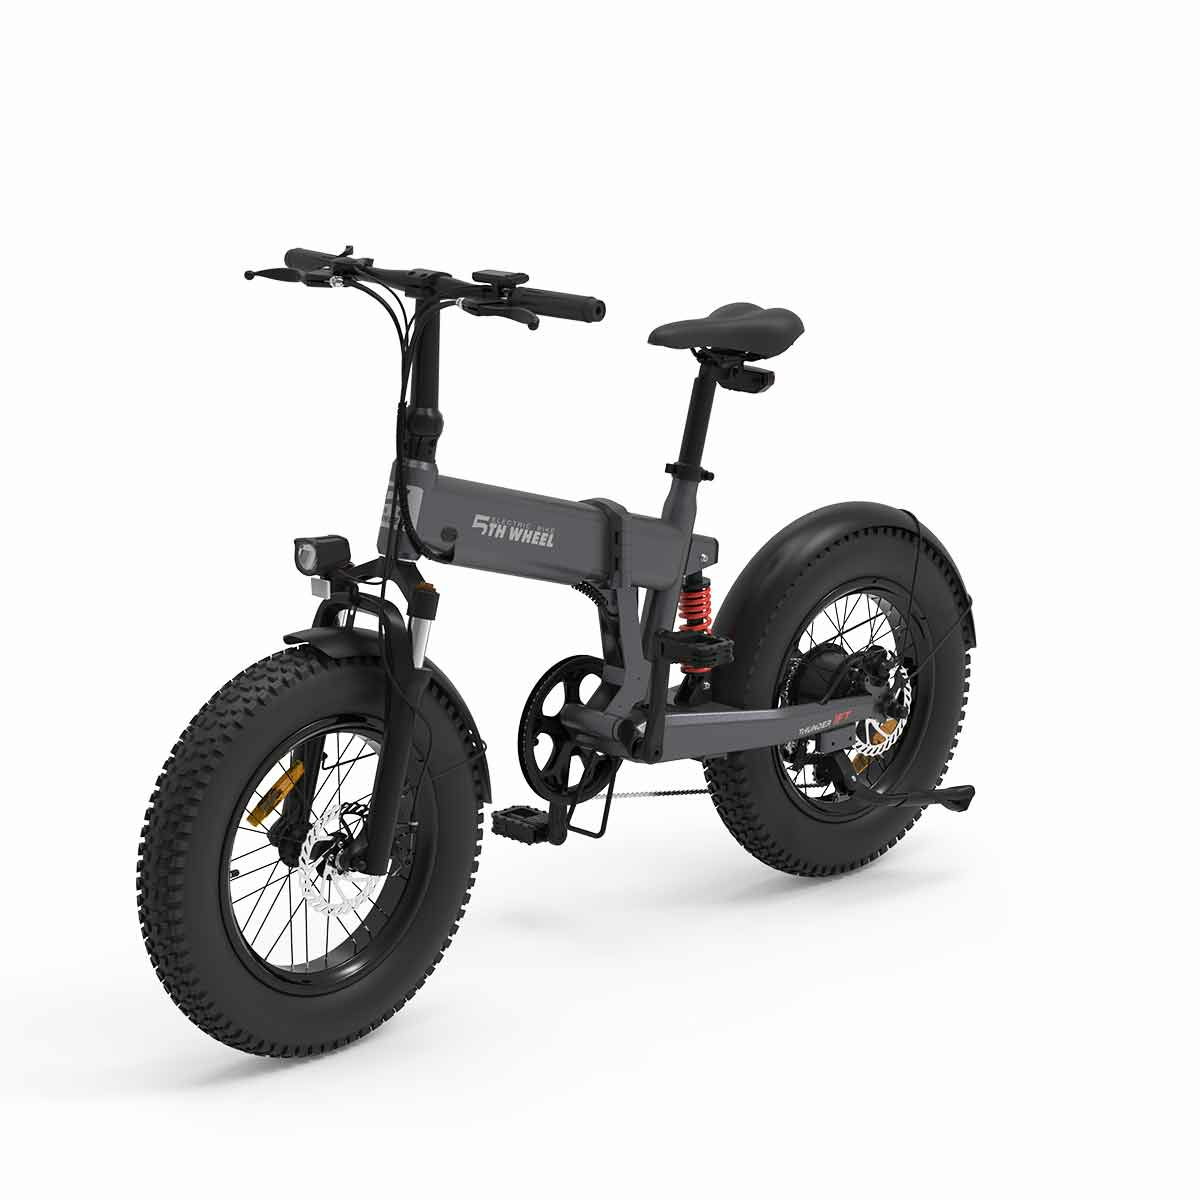 best price,5th,wheel,thunder,1ft,eb06,48v,10ah,500w,20x4.0,inch,electric,scooter,eu,coupon,price,discount